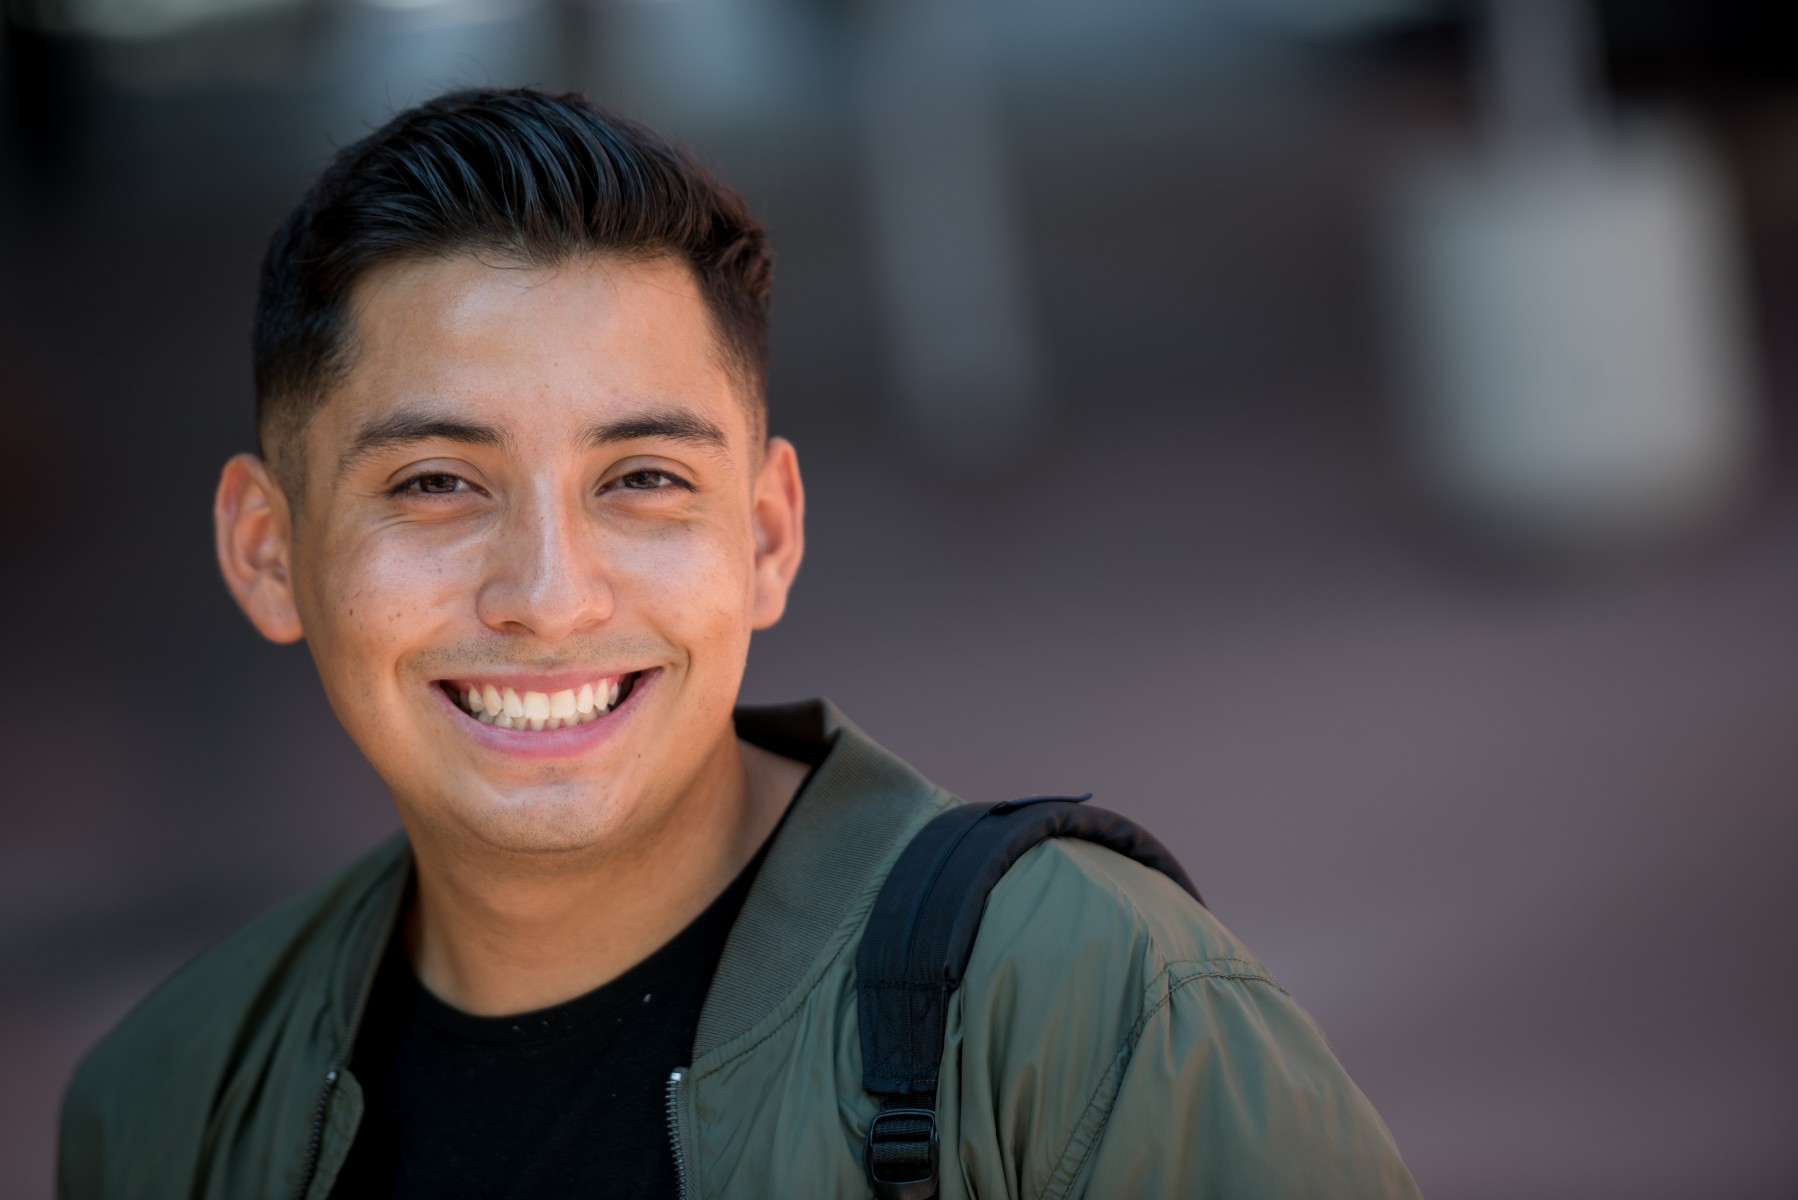 Cal State LA Downtown Student Marvin Vasquez smiles. He is wearing a dark green jacket and has a backpack on his arm.